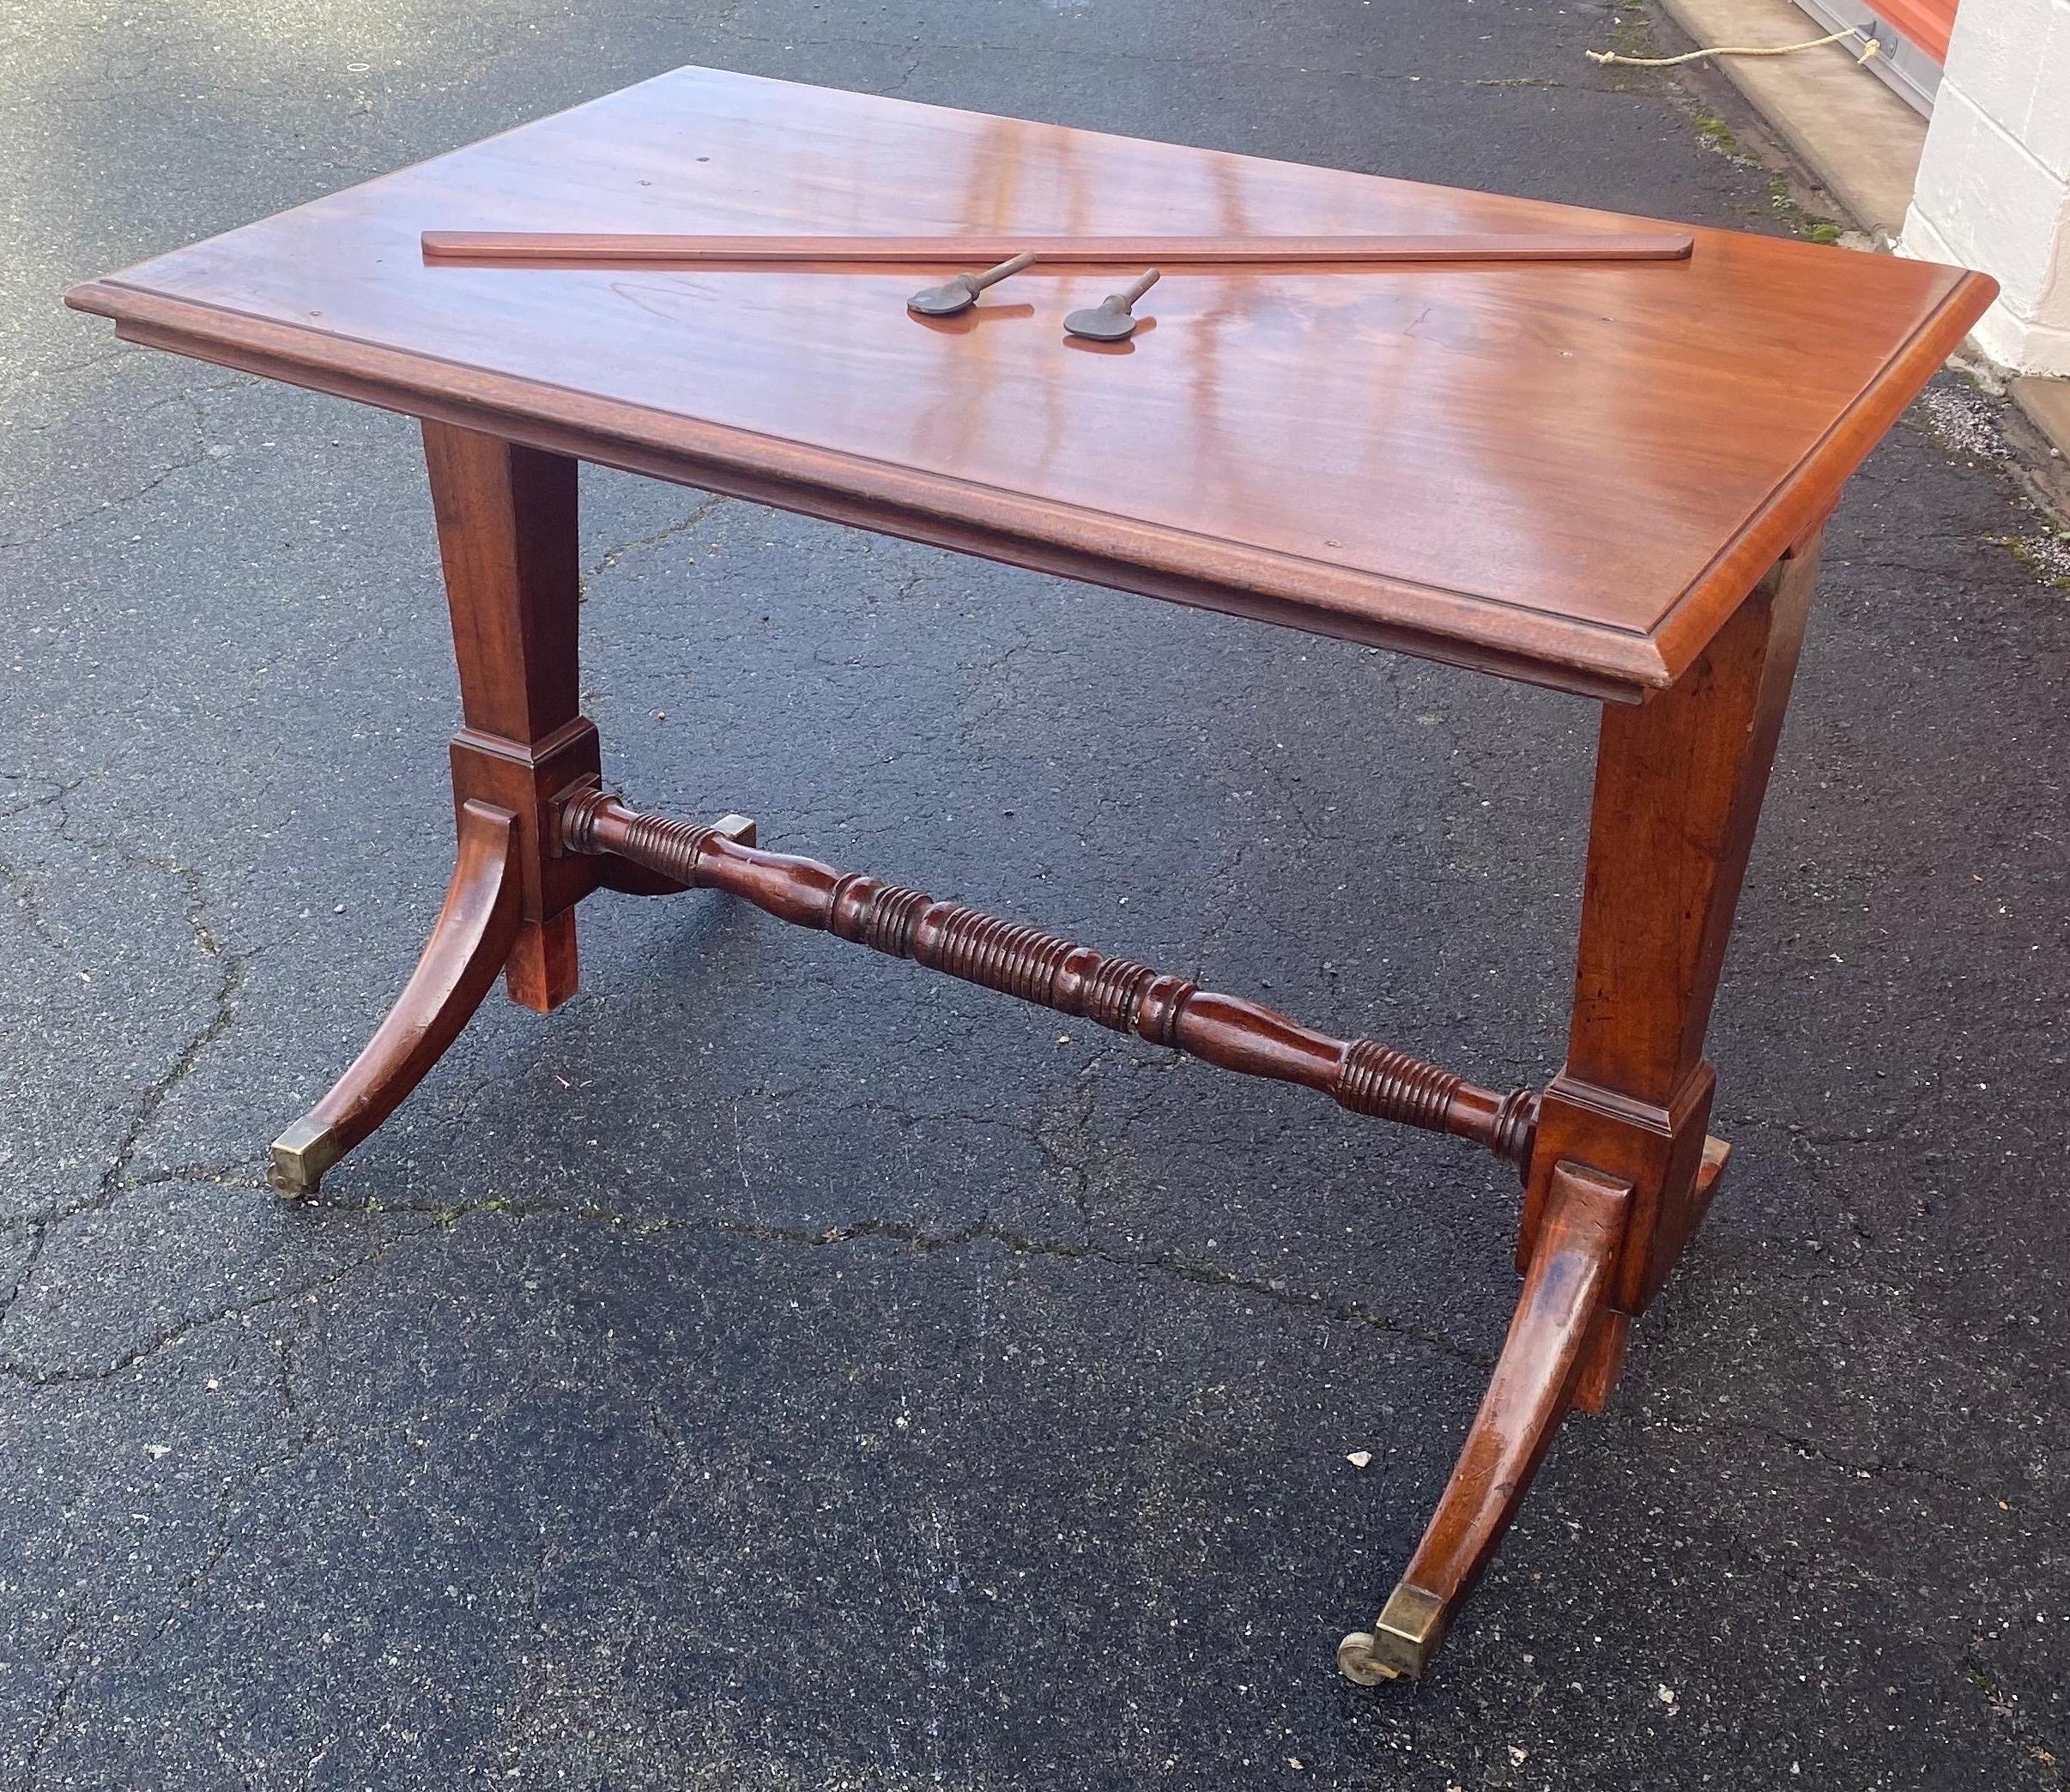 19th century English mahogany extending folio or architect's table. Great color and lines. 29.25